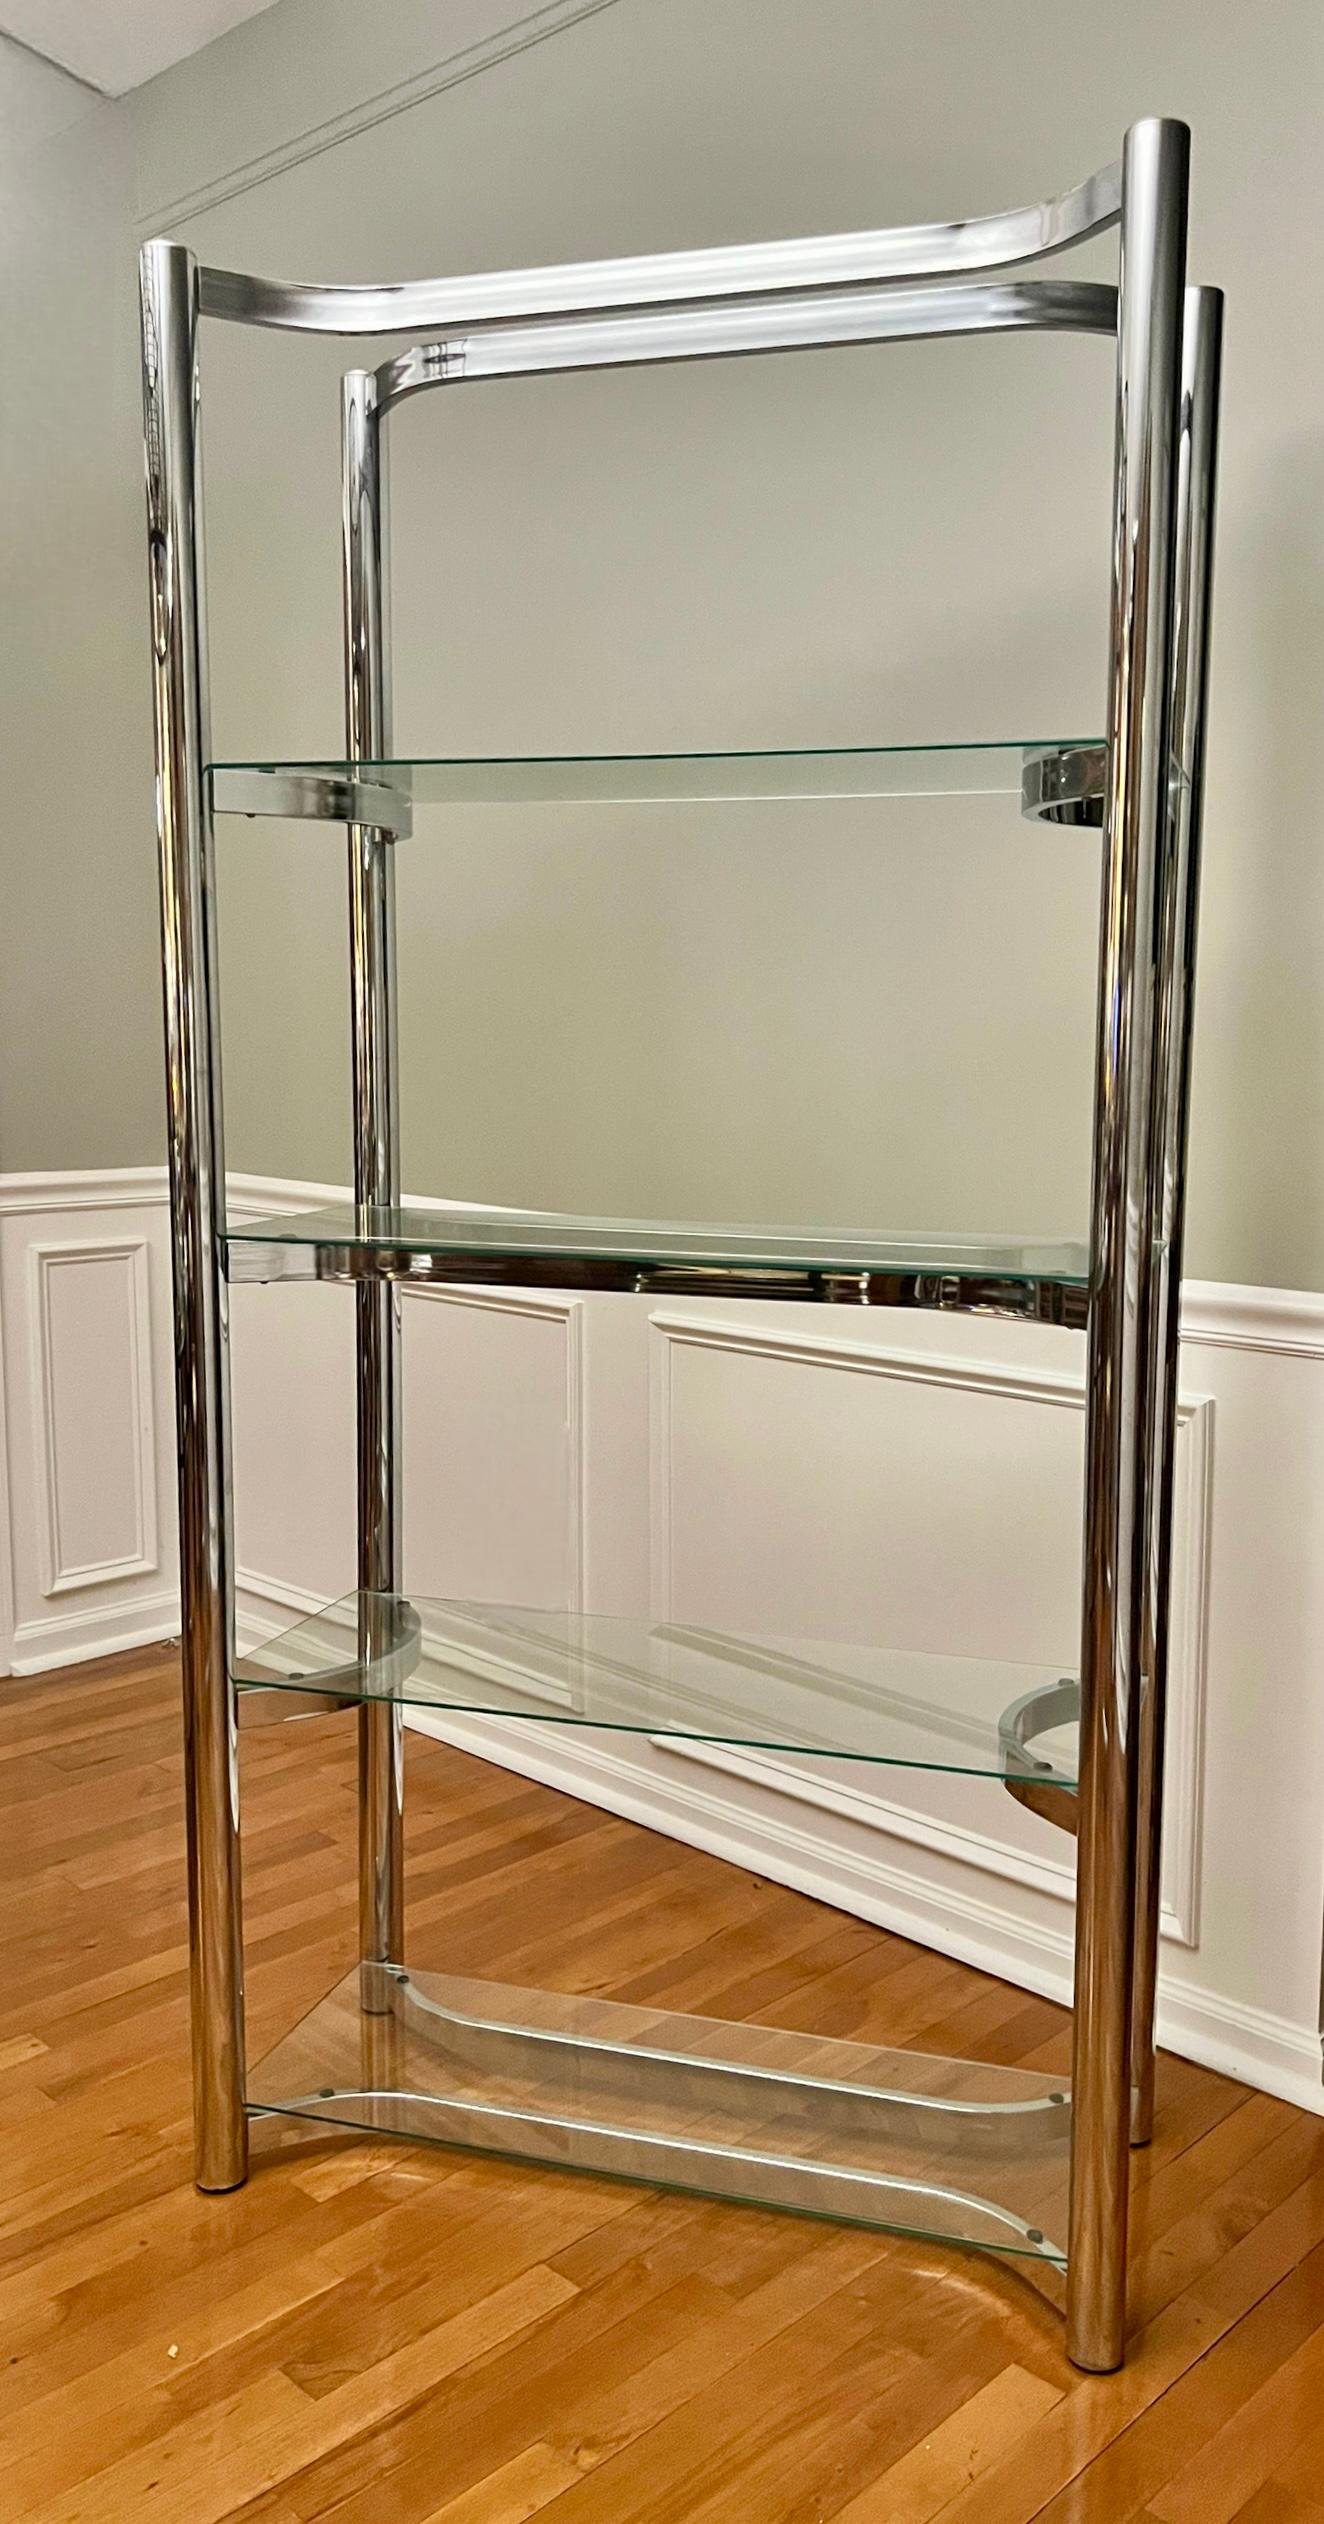 1970s chrome etagere with four glass shelves attributed to Milo Baughman.

Stunning etagere with a shiny chrome plated steel frame featuring flat bar shelf supports set in an alternating curved pattern which adds visual interest to its unique design